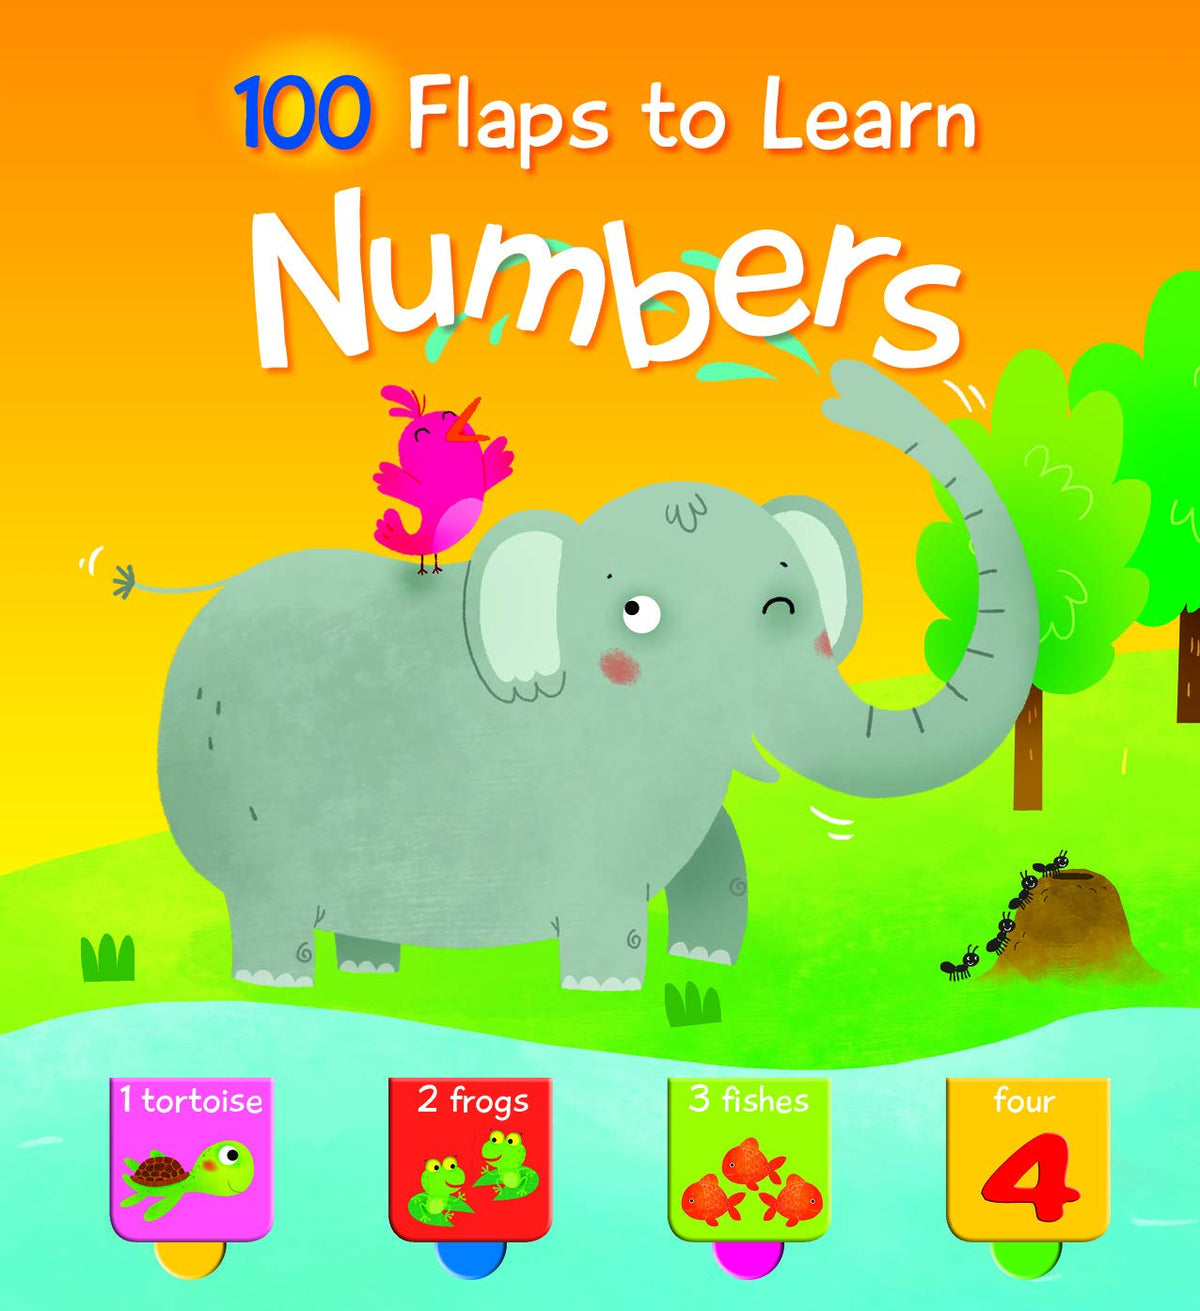 100 Flaps to Learn Numbers